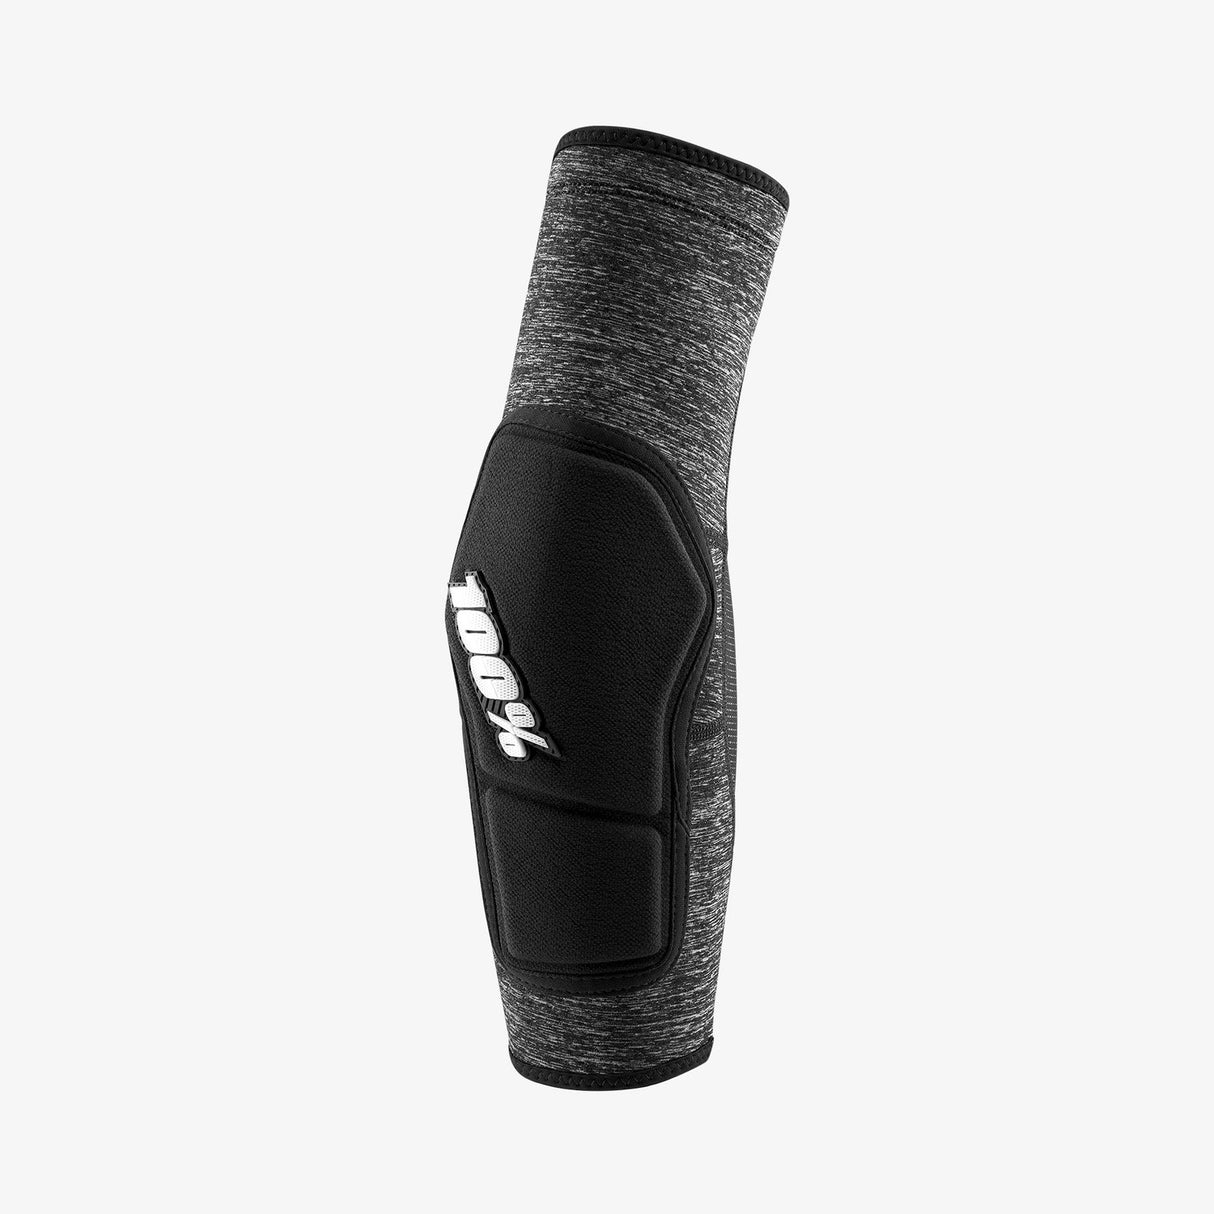 Ride 100% RIDECAMP Elbow Guards/Pads, Color: Grey Heather/Black- Size MD